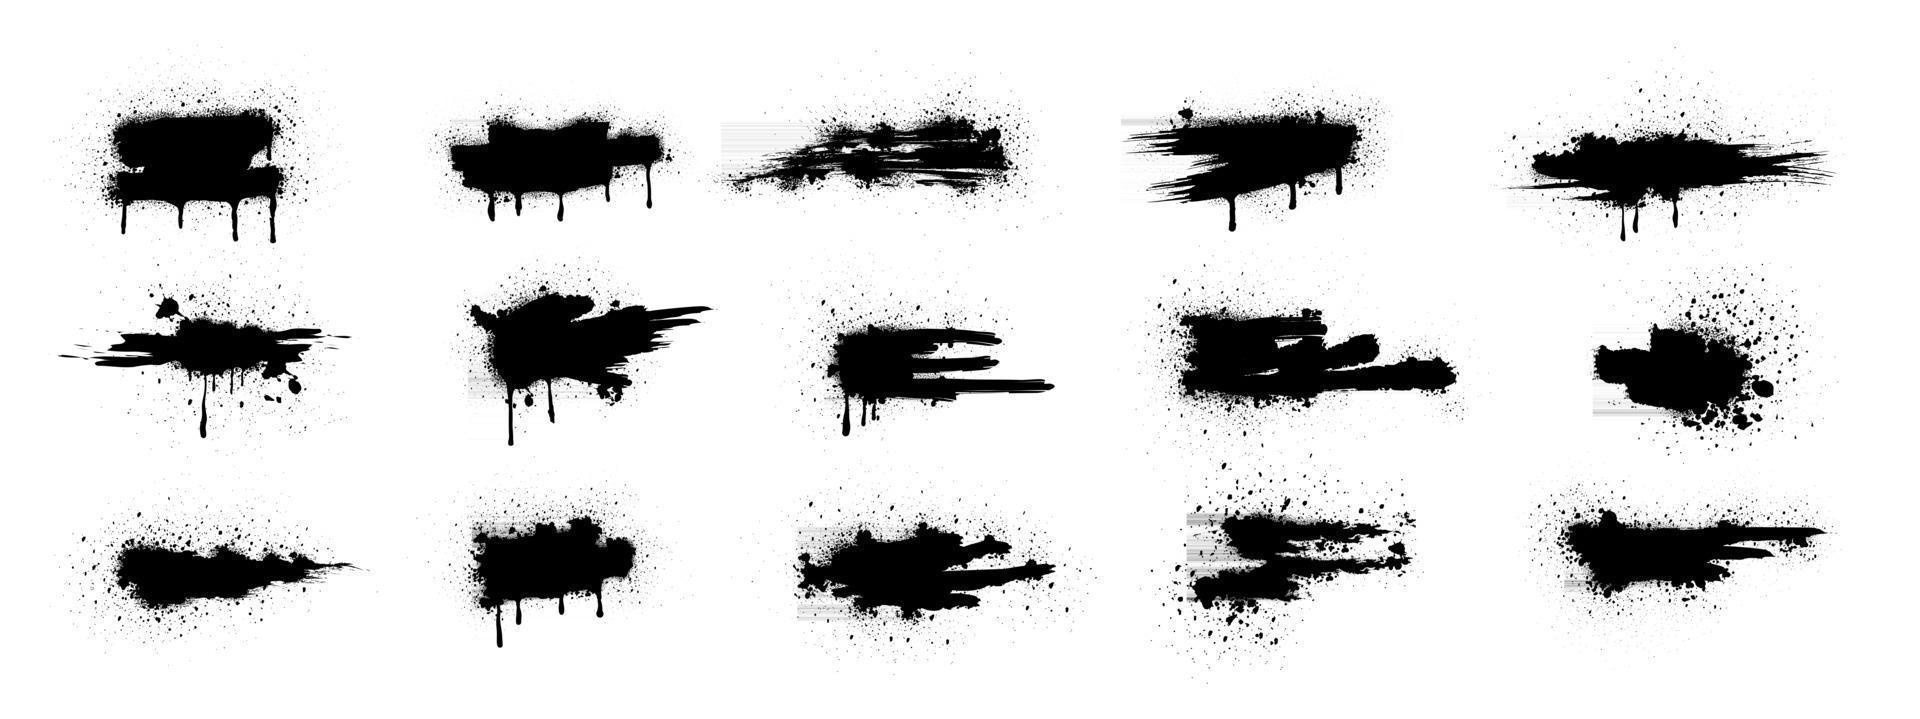 Spray Paint Vector Elements isolated on White Background. Set of  frame and black round ink stains, Lines and Drips Black ink splatters, Ink blots set, Street style.